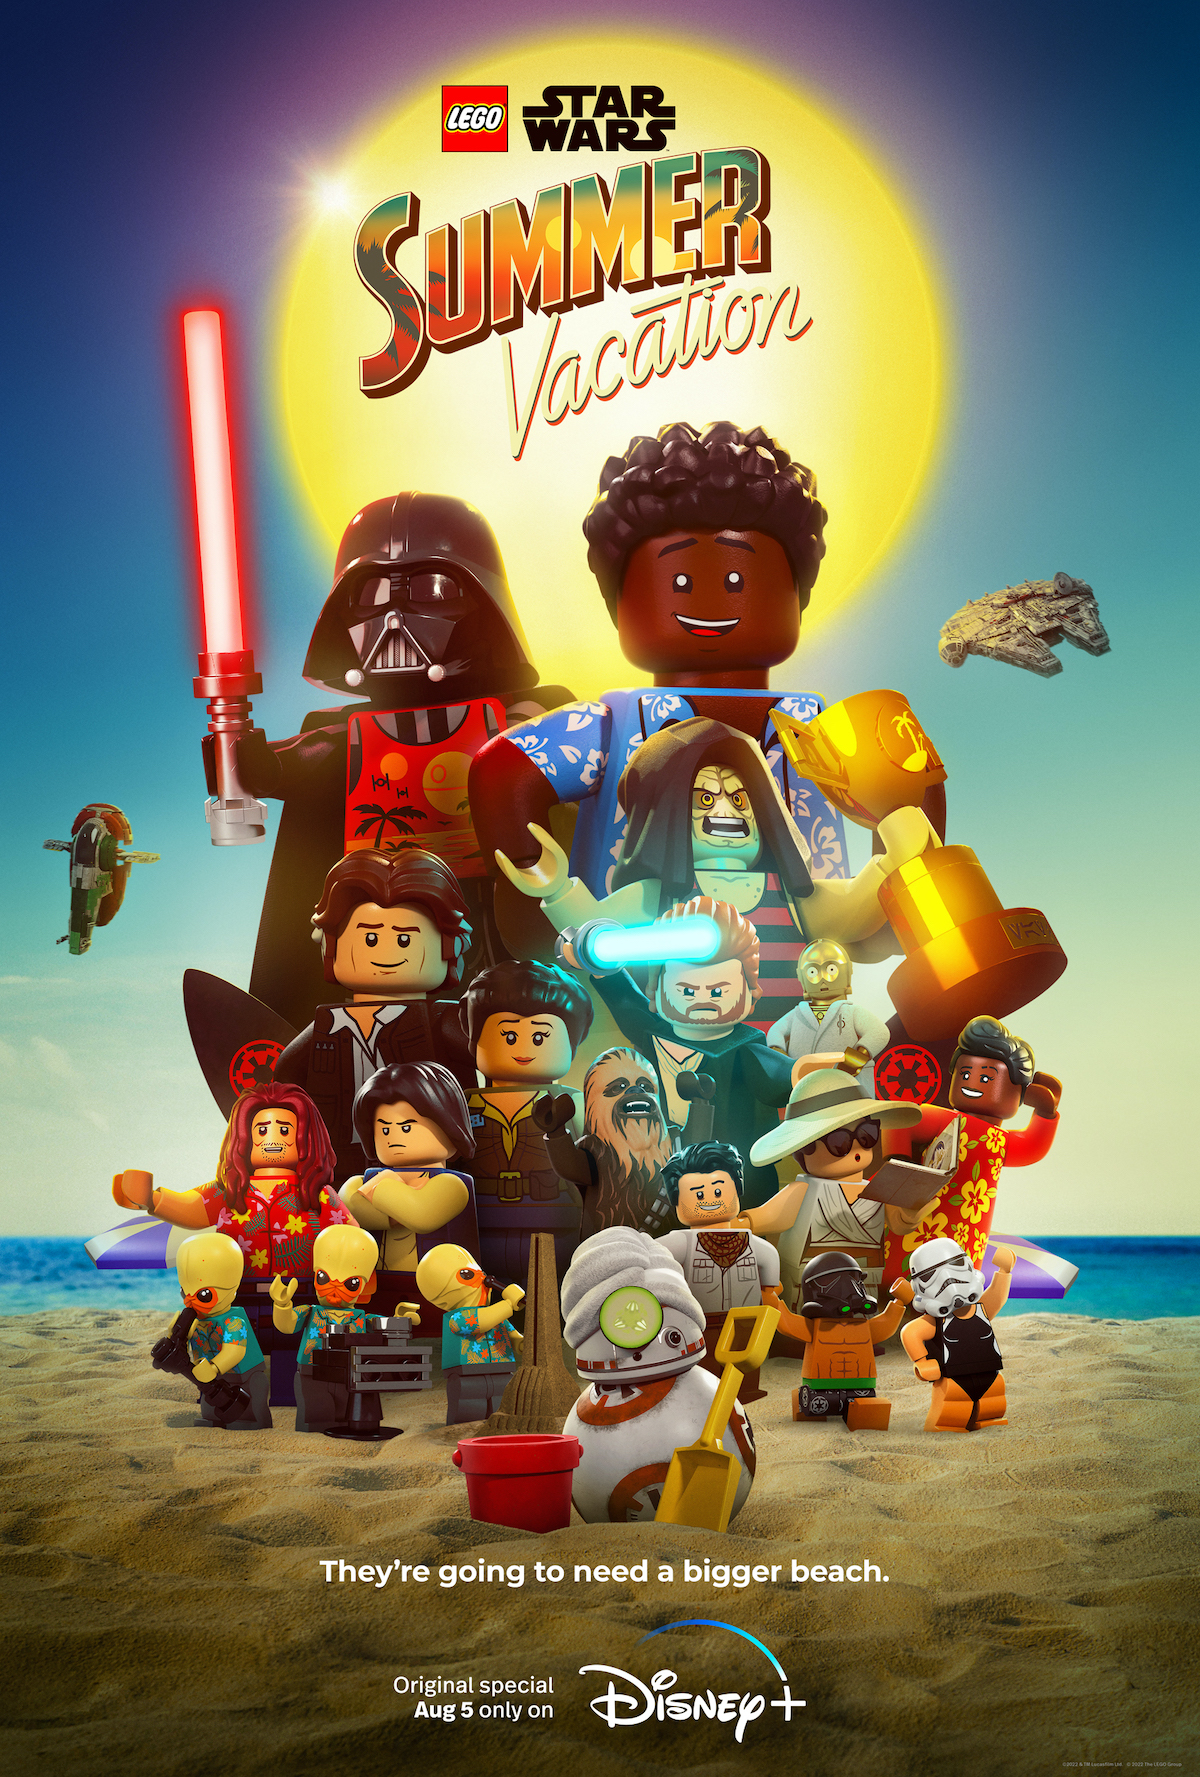 Watch New Clip From 'LEGO Star Wars Summer Vacation'